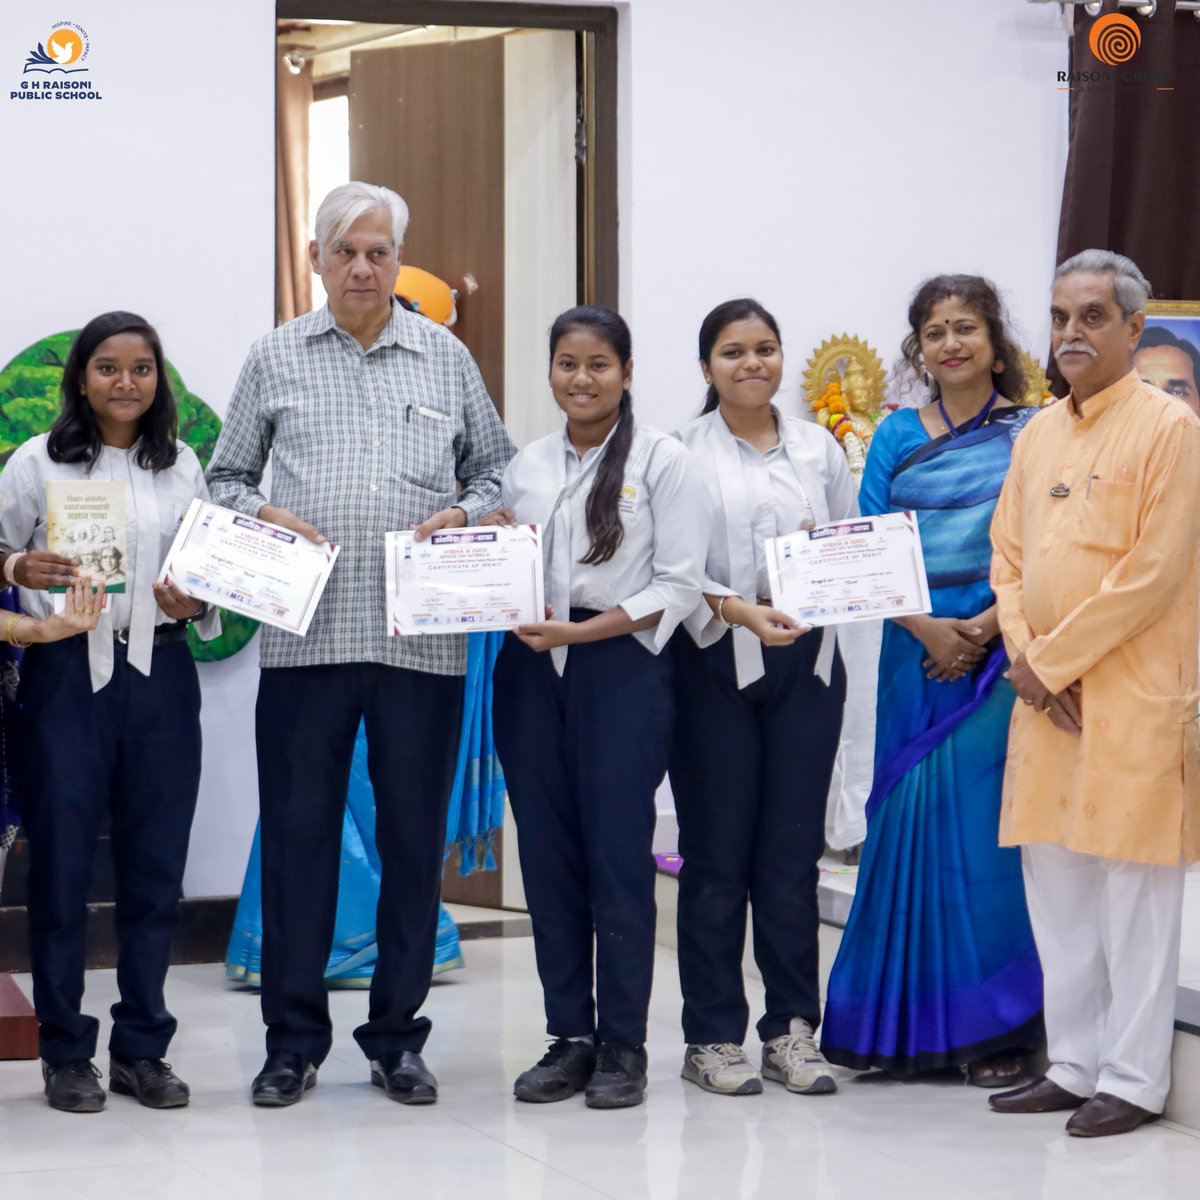 Celebrating science & fostering young minds! 🚀 GHR Public School hosted 'Space on Wheels,' a joint initiative by ISRO & Vidhnyan Bharti. Graced by eminent personalities, it was an awe-inspiring event! 🌟

#RGI #Raisoni #GHRPS #Nagpur #ScienceCelebration #EducationInnovation